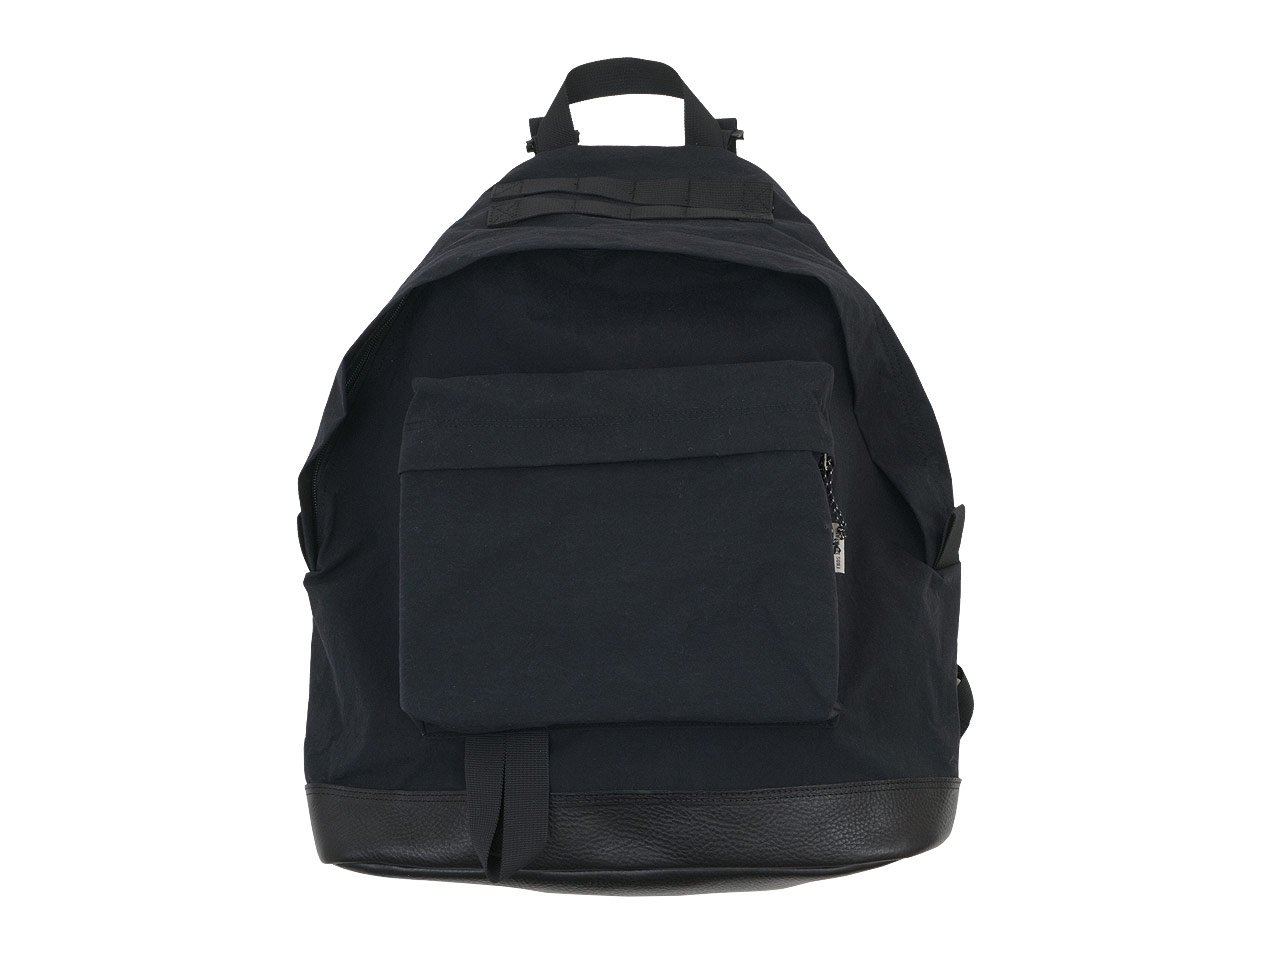 ENDS and MEANS DAYTRIP BACKPACK購入価格26400円 - リュック/バックパック